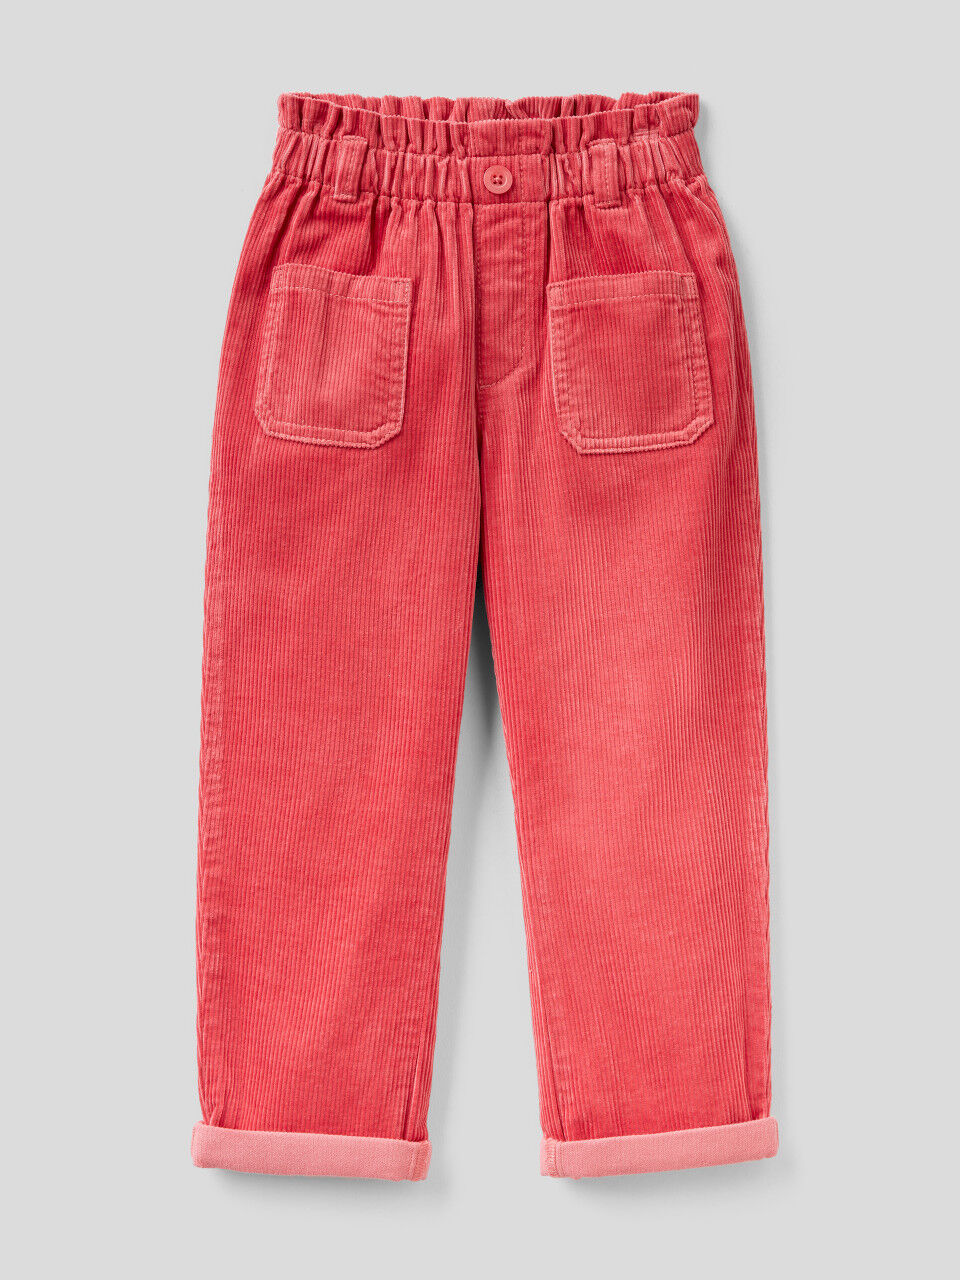 Trousers in corduroy